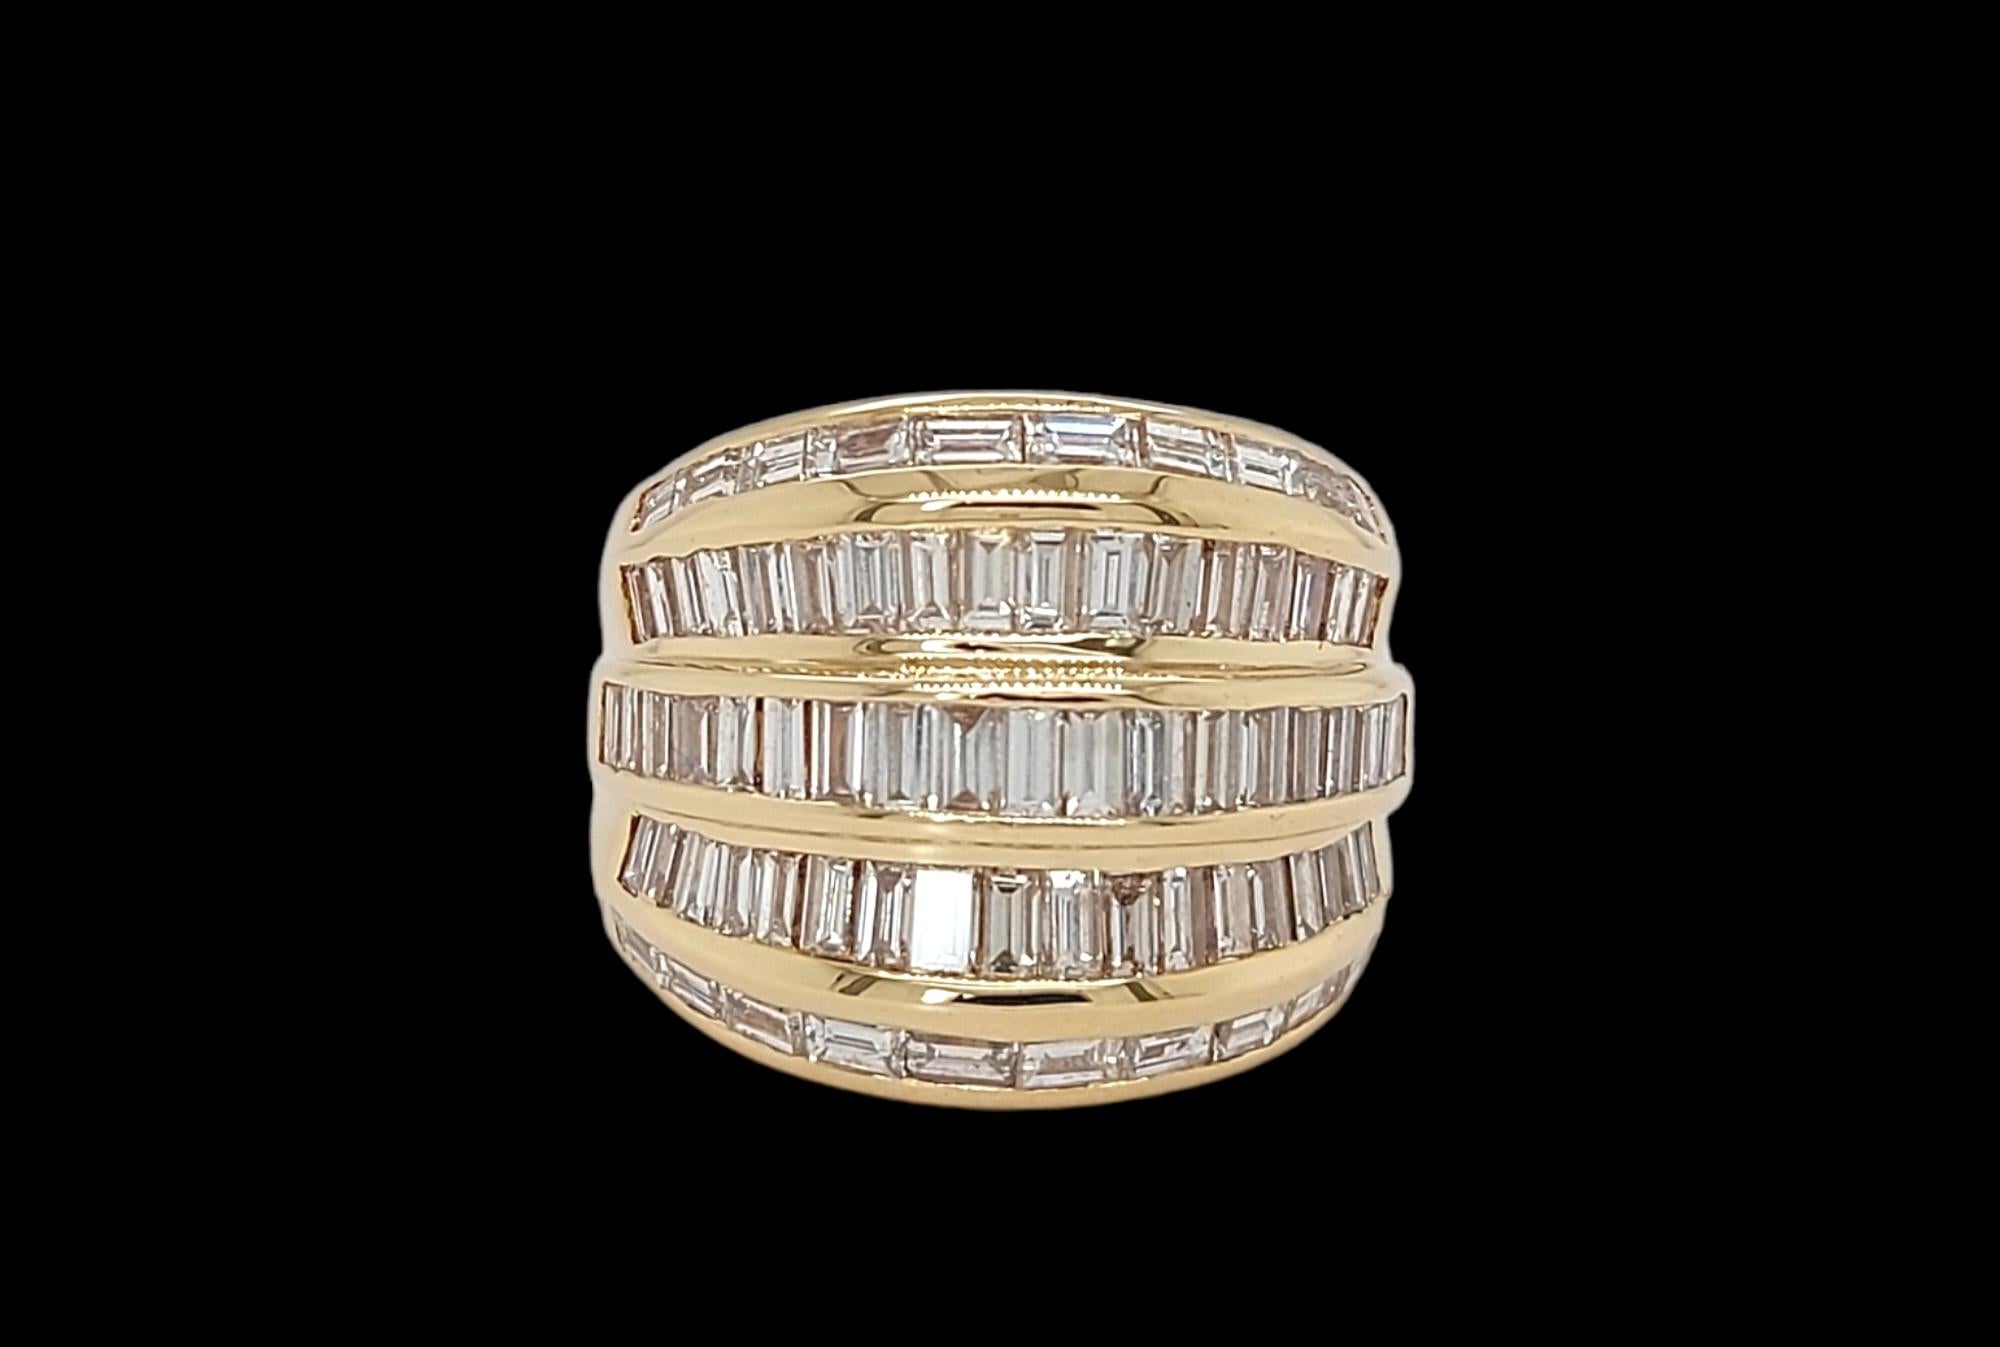 Gorgeous 18kt Yellow gold Ring with 4ct Baguette Cut Diamonds, Estate His Majesty The Sultan Of Oman Qaboos Bin Said

Can be added to Item  LU1752218845402 or Item LU1752218608042

Diamonds: baguette cut diamonds approx. 4.5 ct. in total

Material: